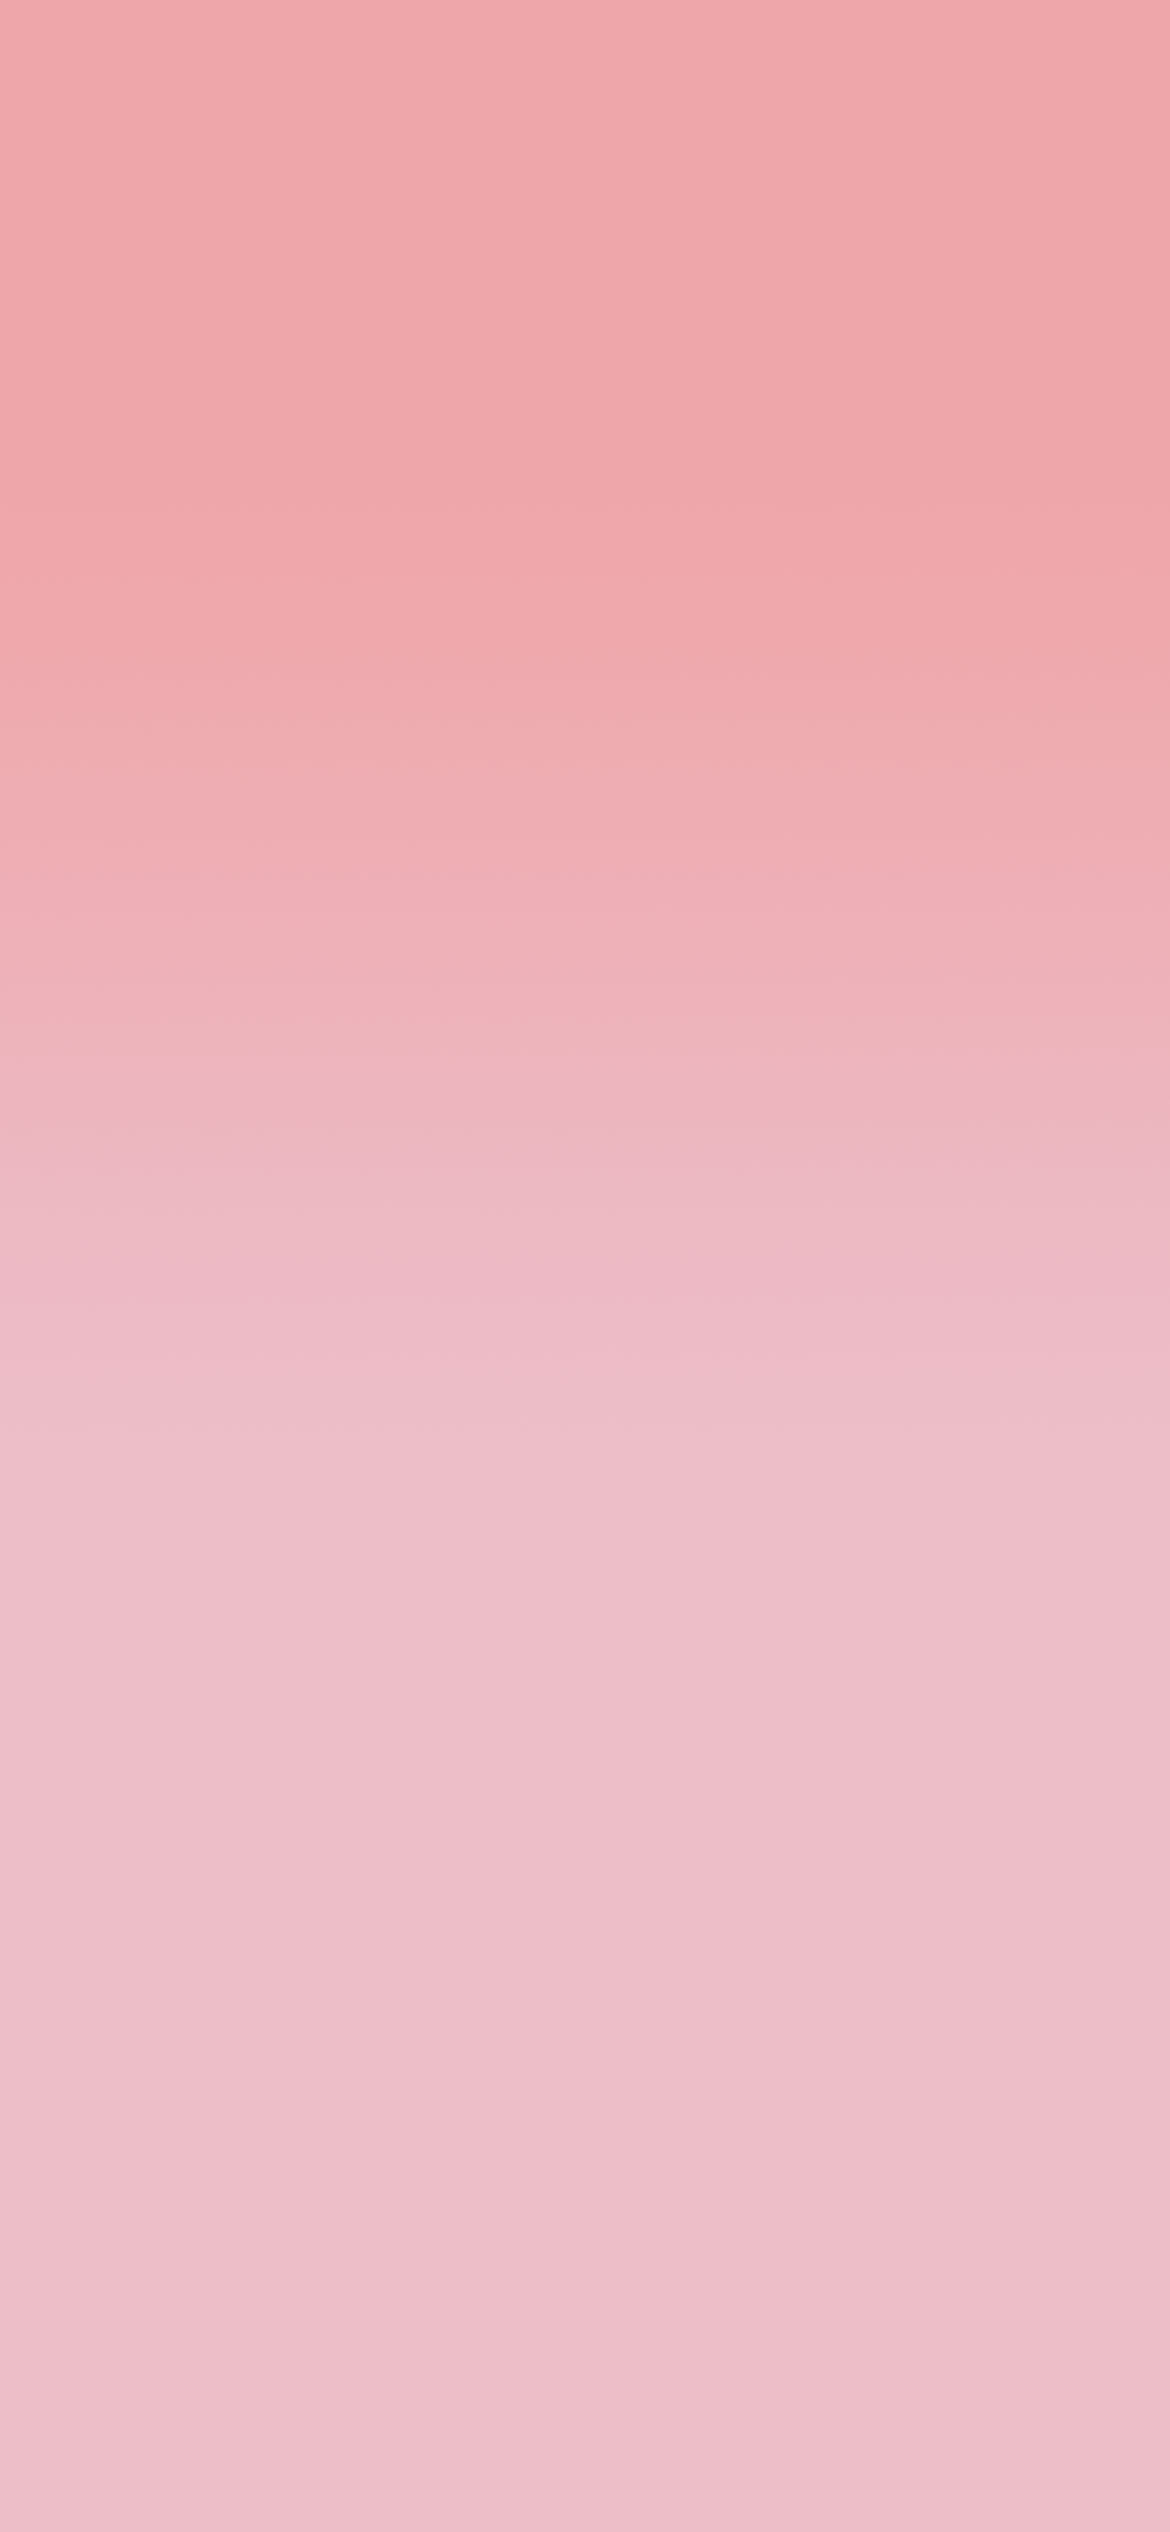 A pink and white background with no text - Pink